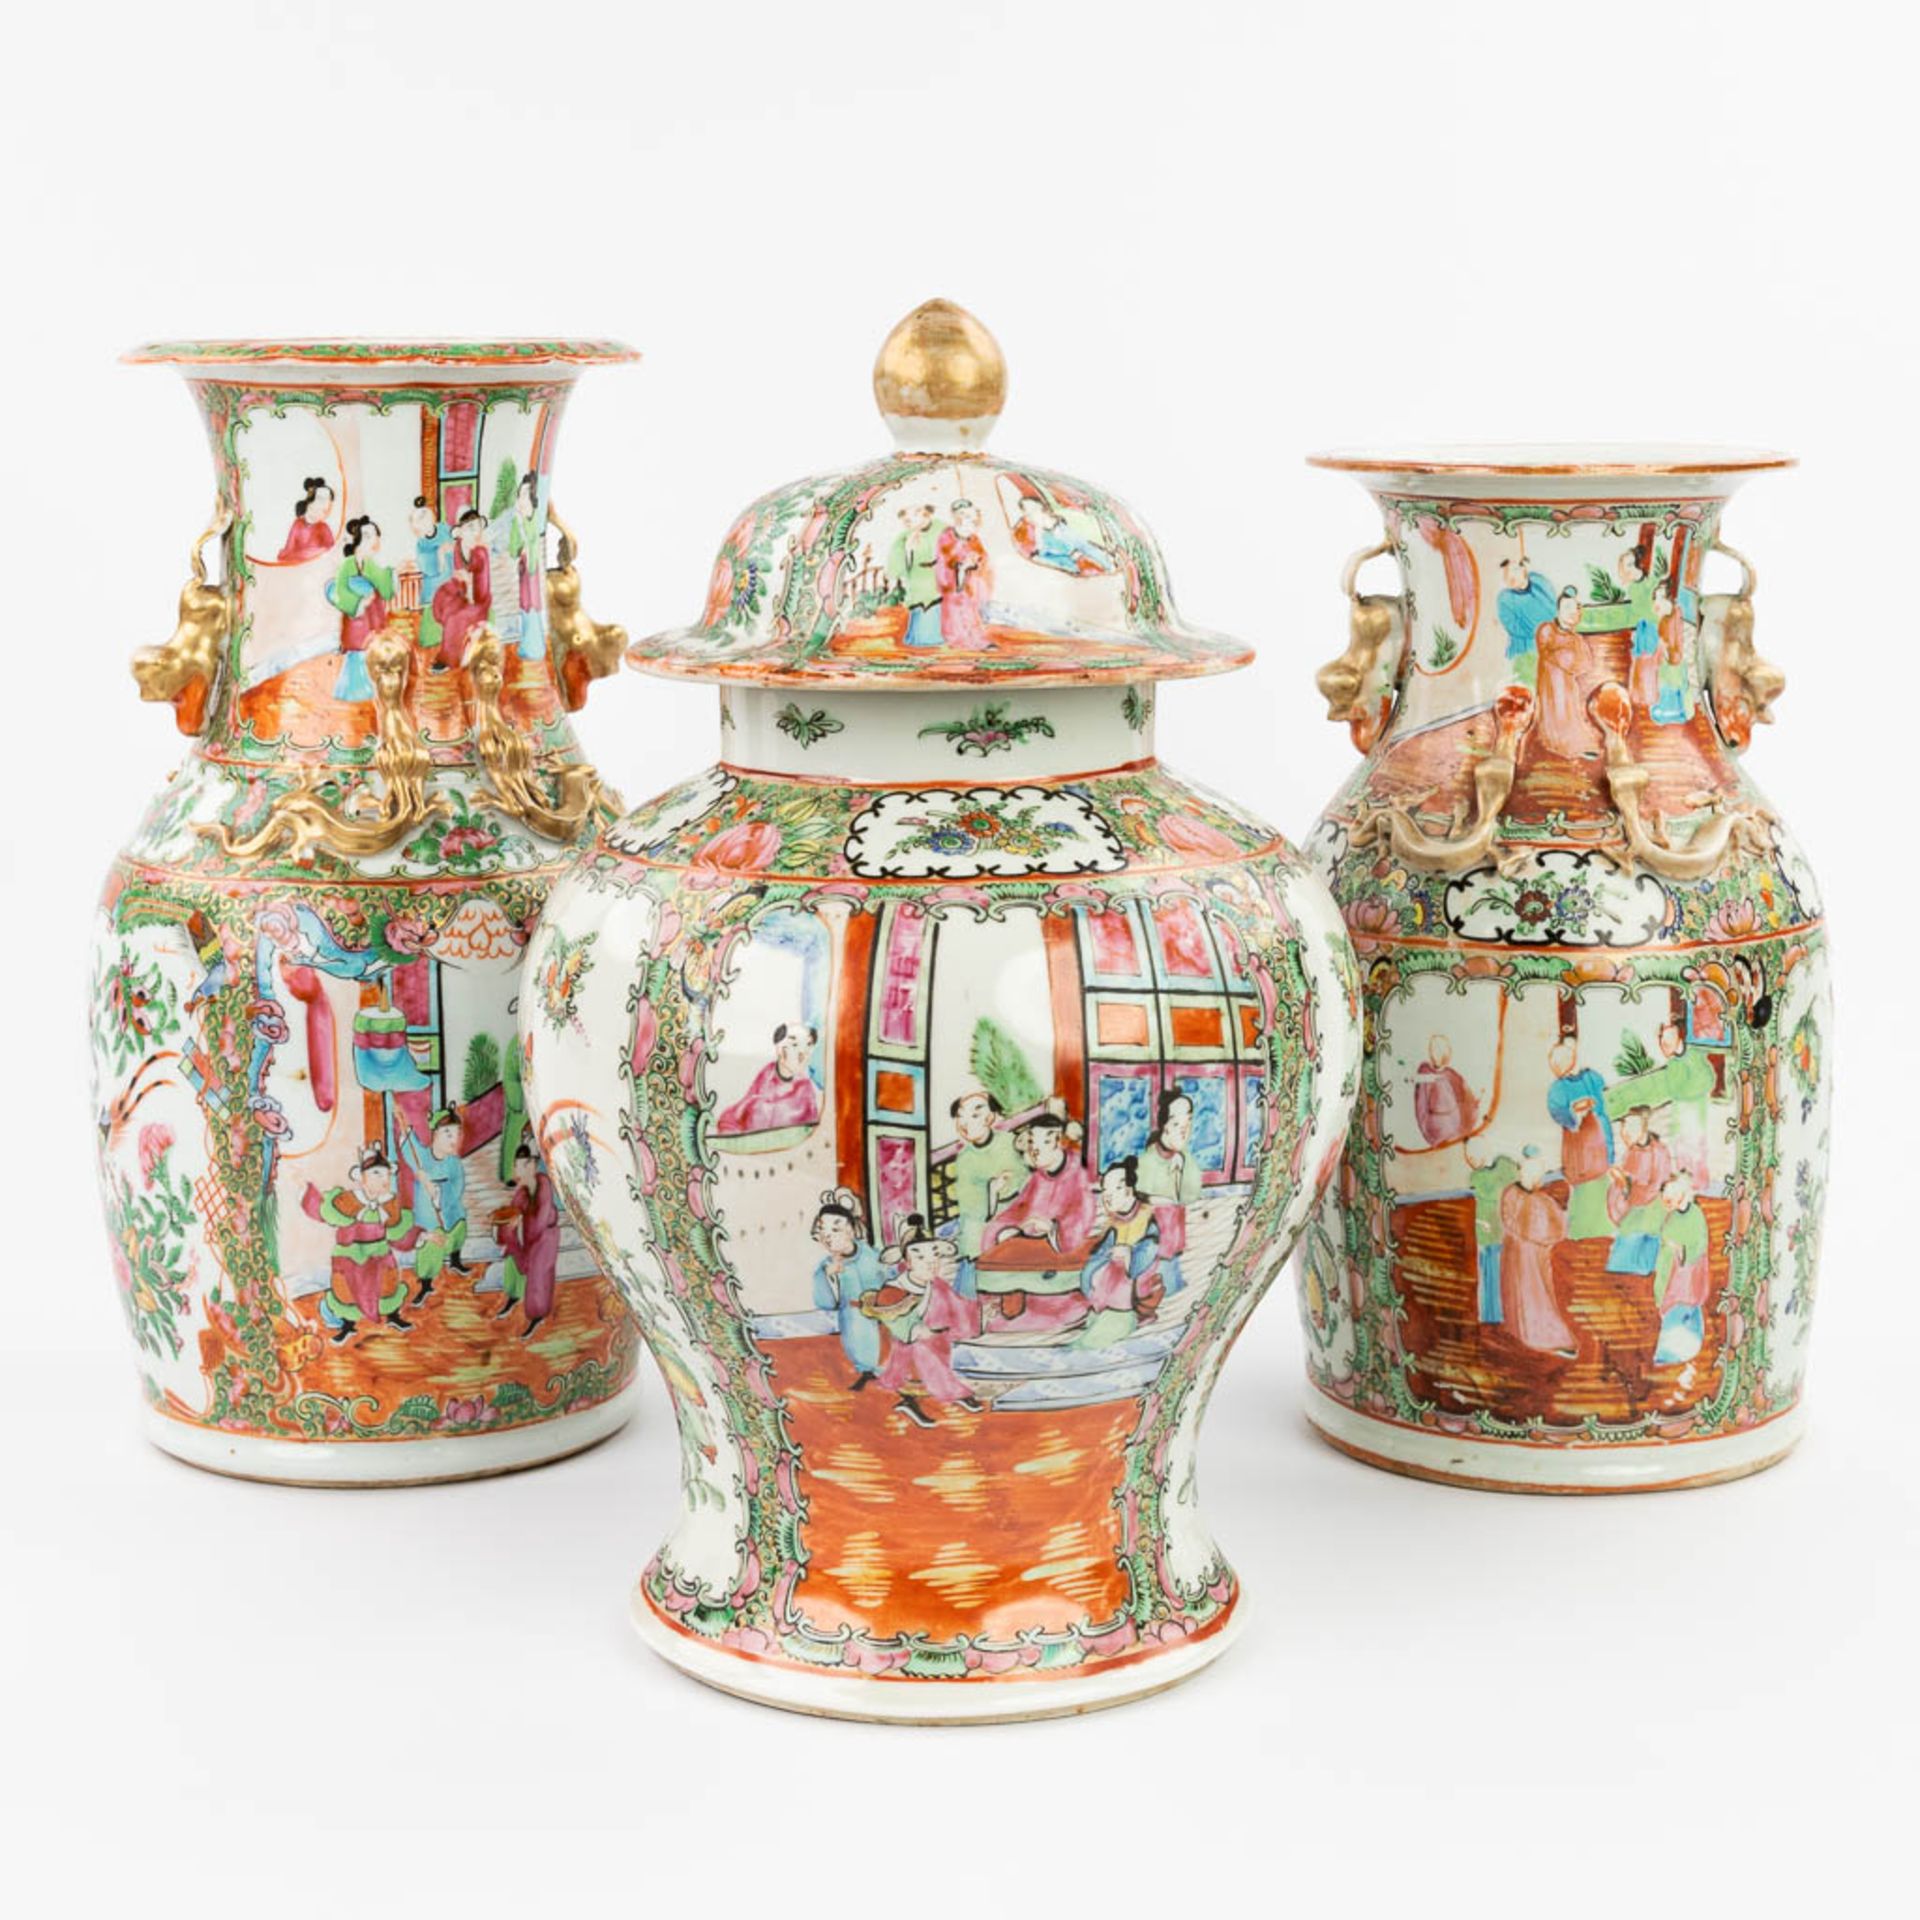 A collection of 3 Chinese vases with Kanton decor (38 x 23 cm)